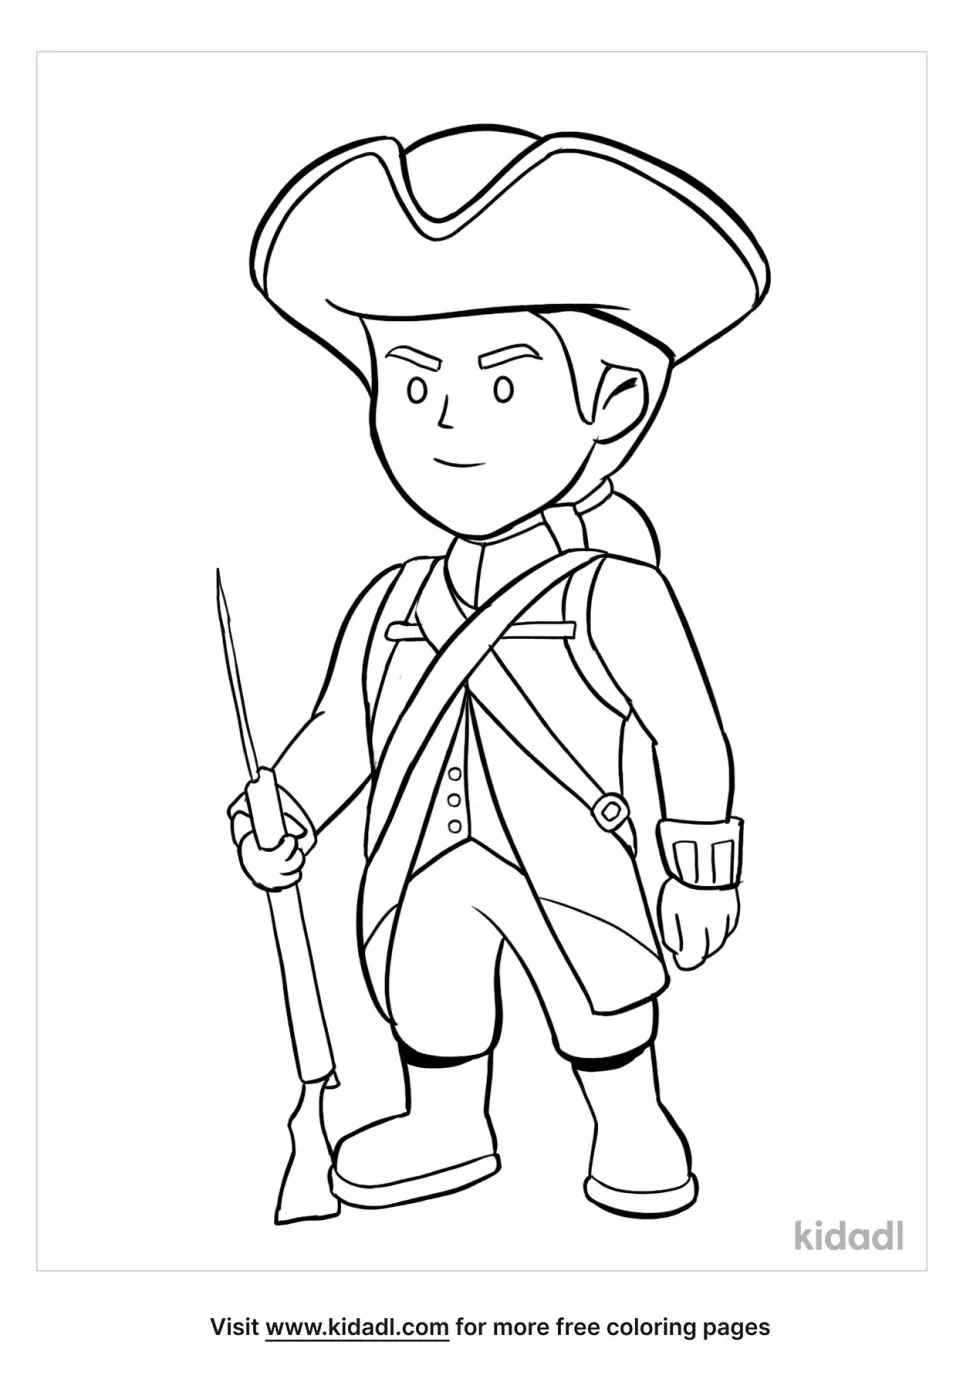 1776 Soldier Coloring Page